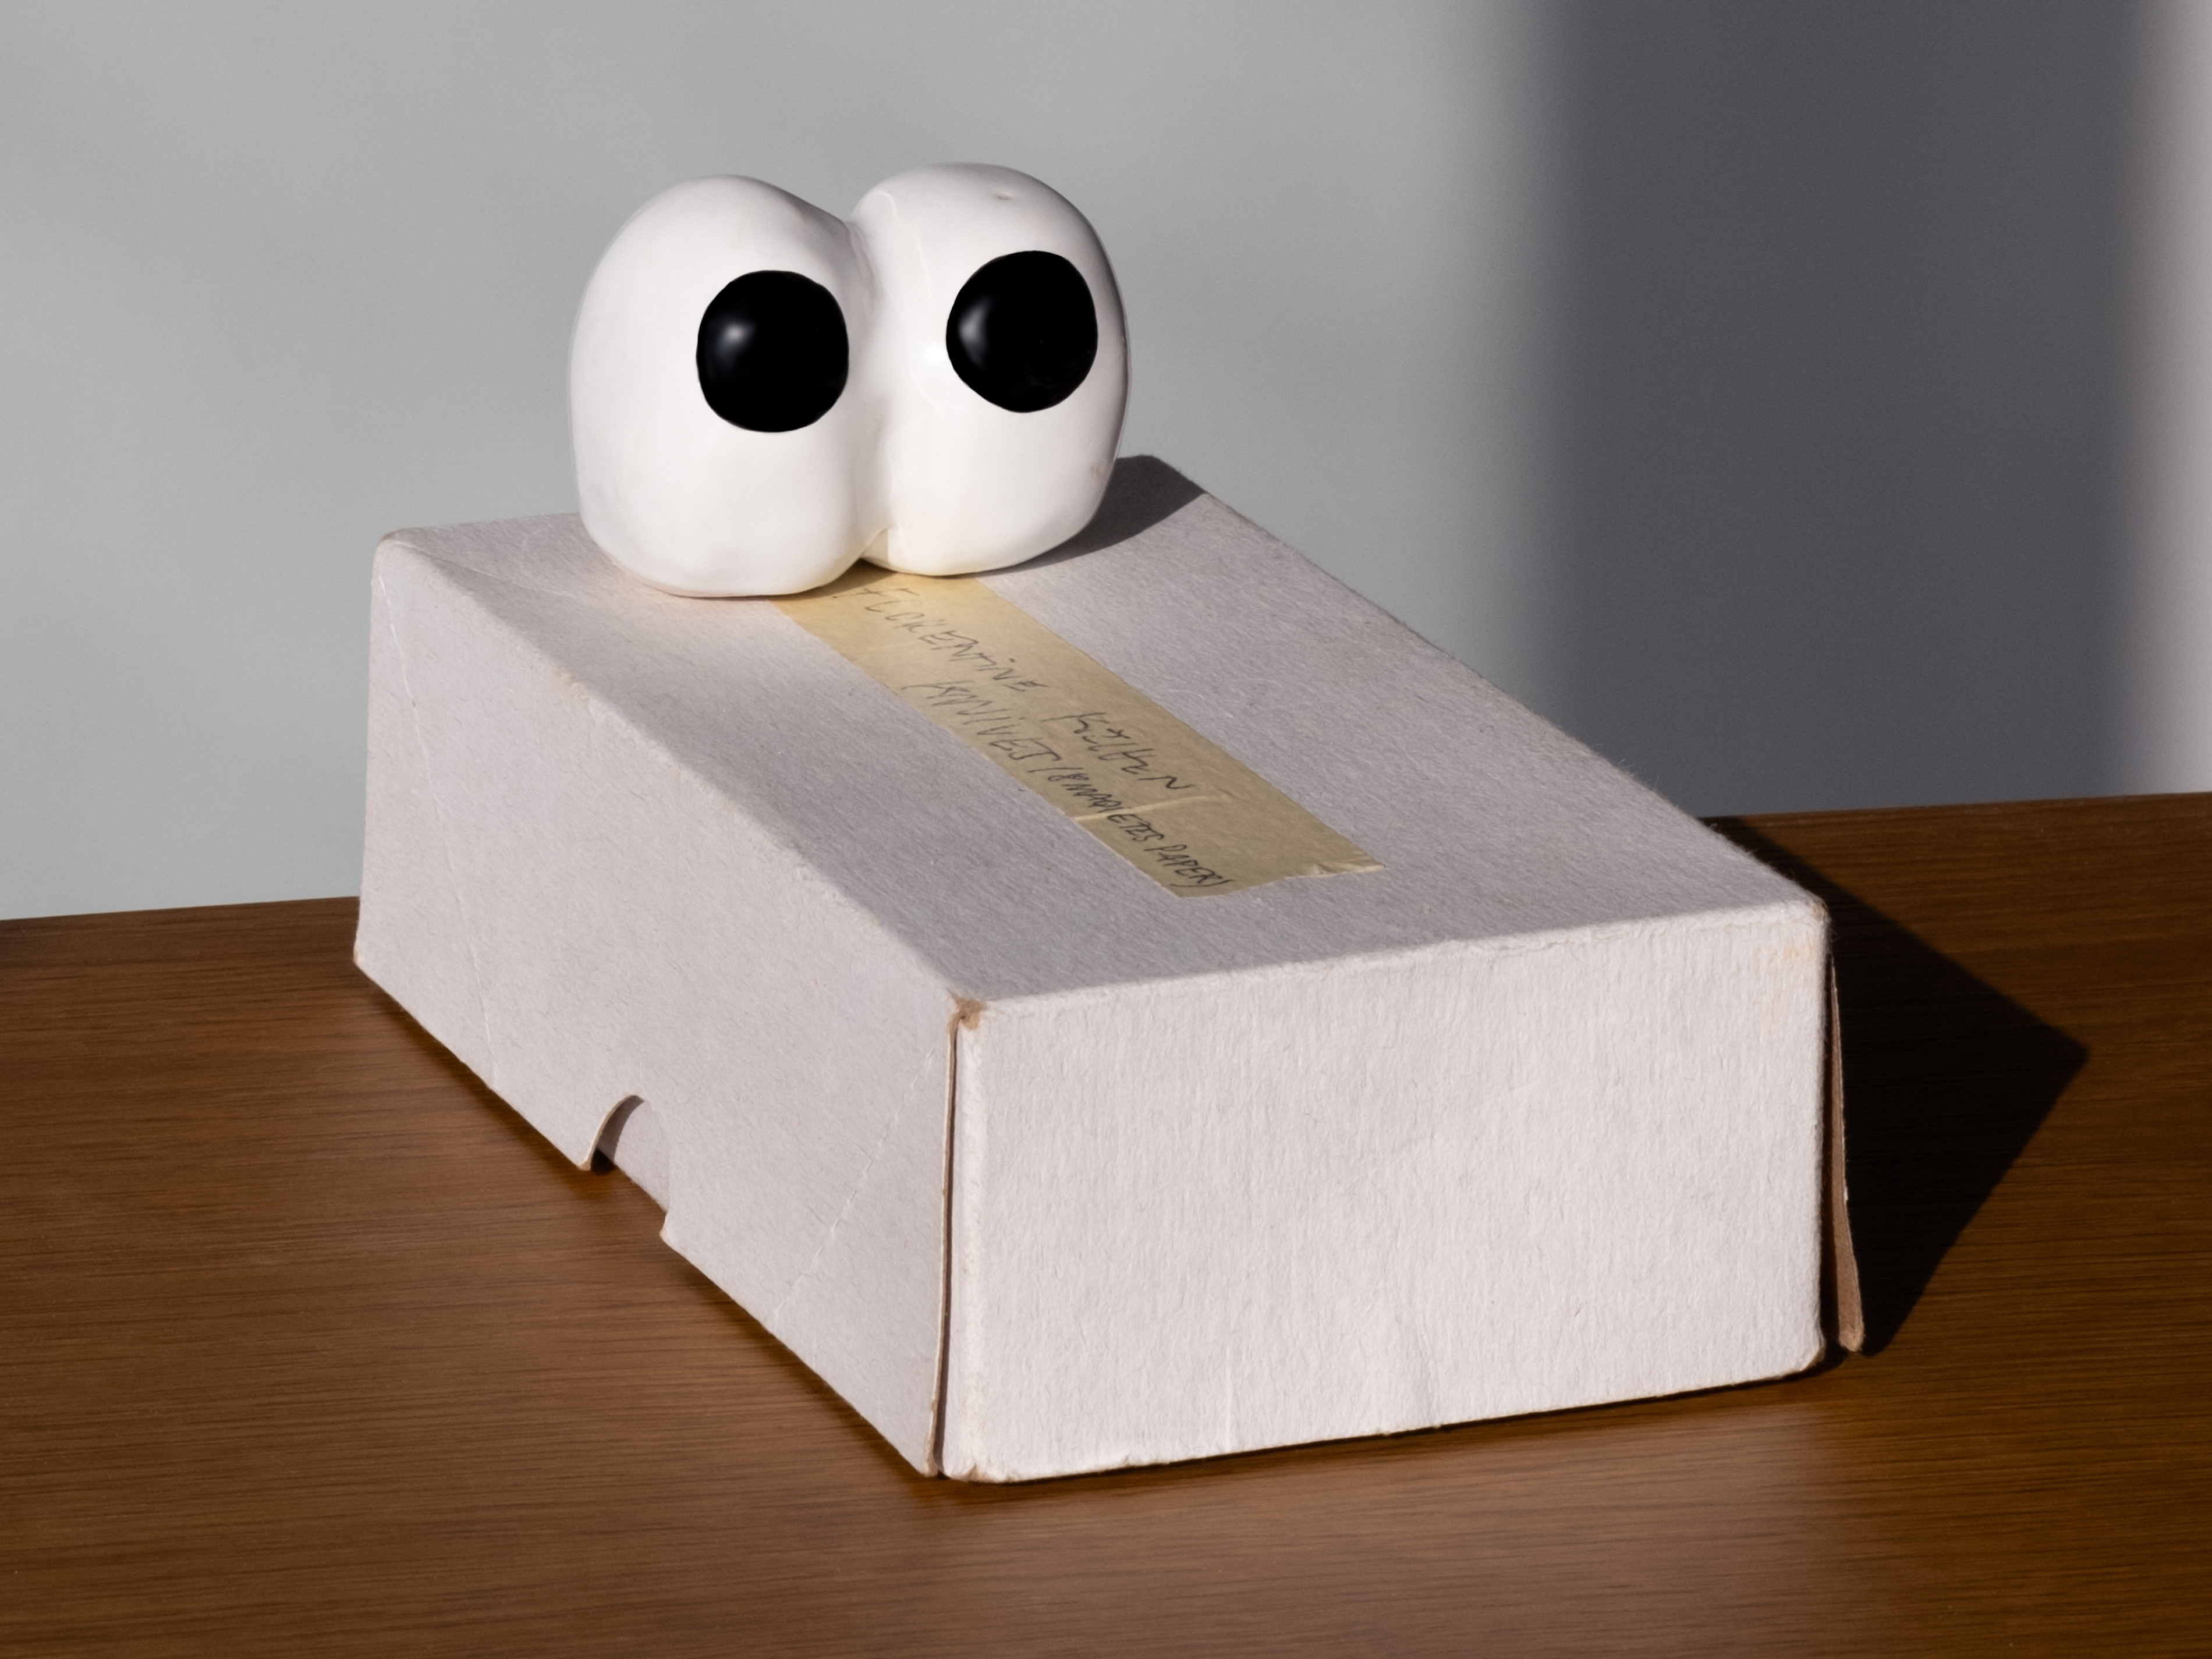 A pair of ceramic eyes standing on an old cardboard box